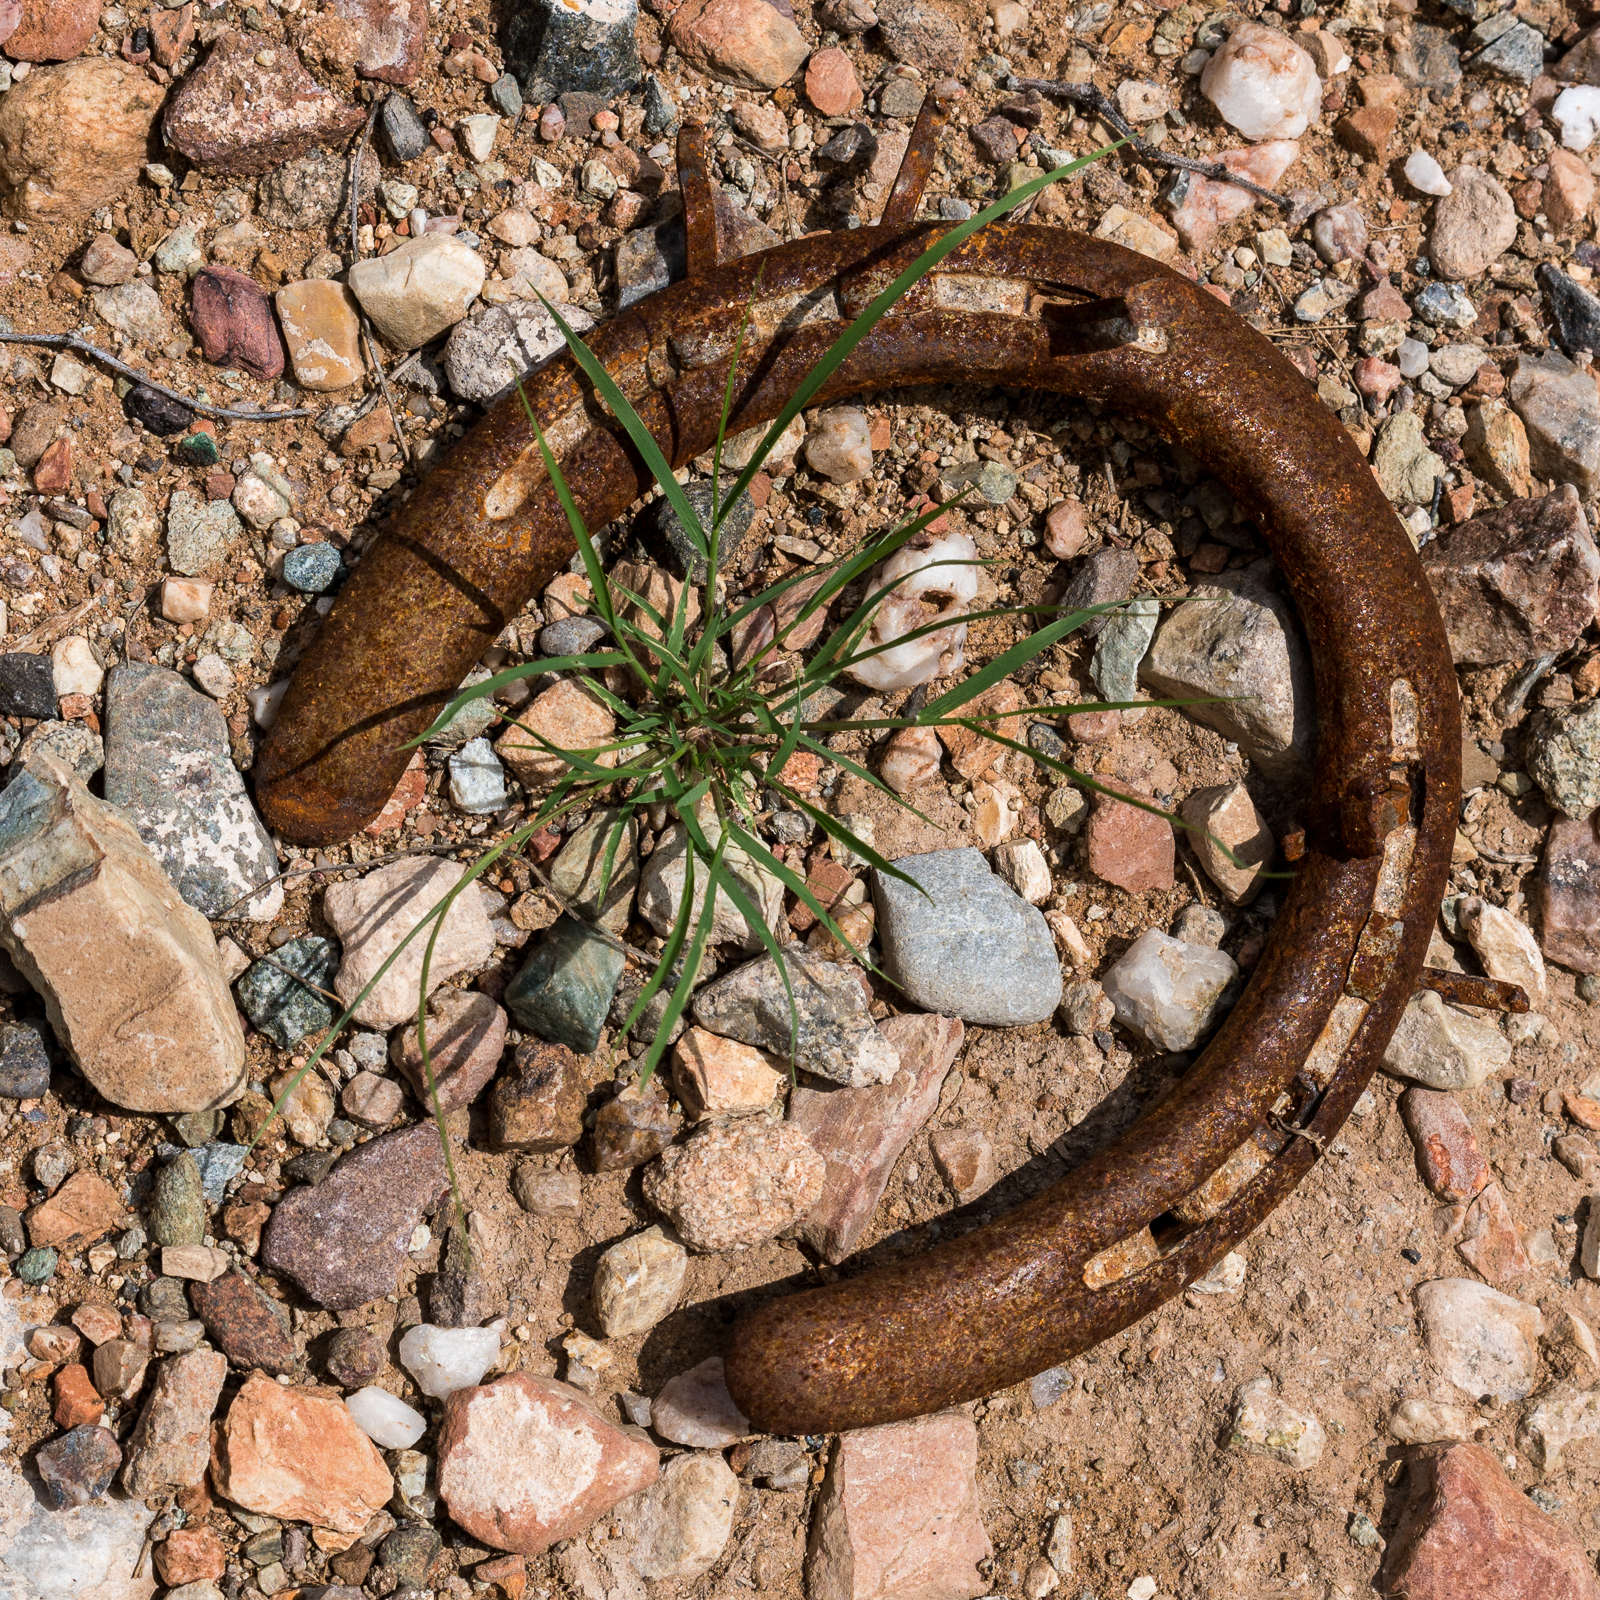 A horseshoe in the Deep Well area of Geesaman Wash. August 2016.